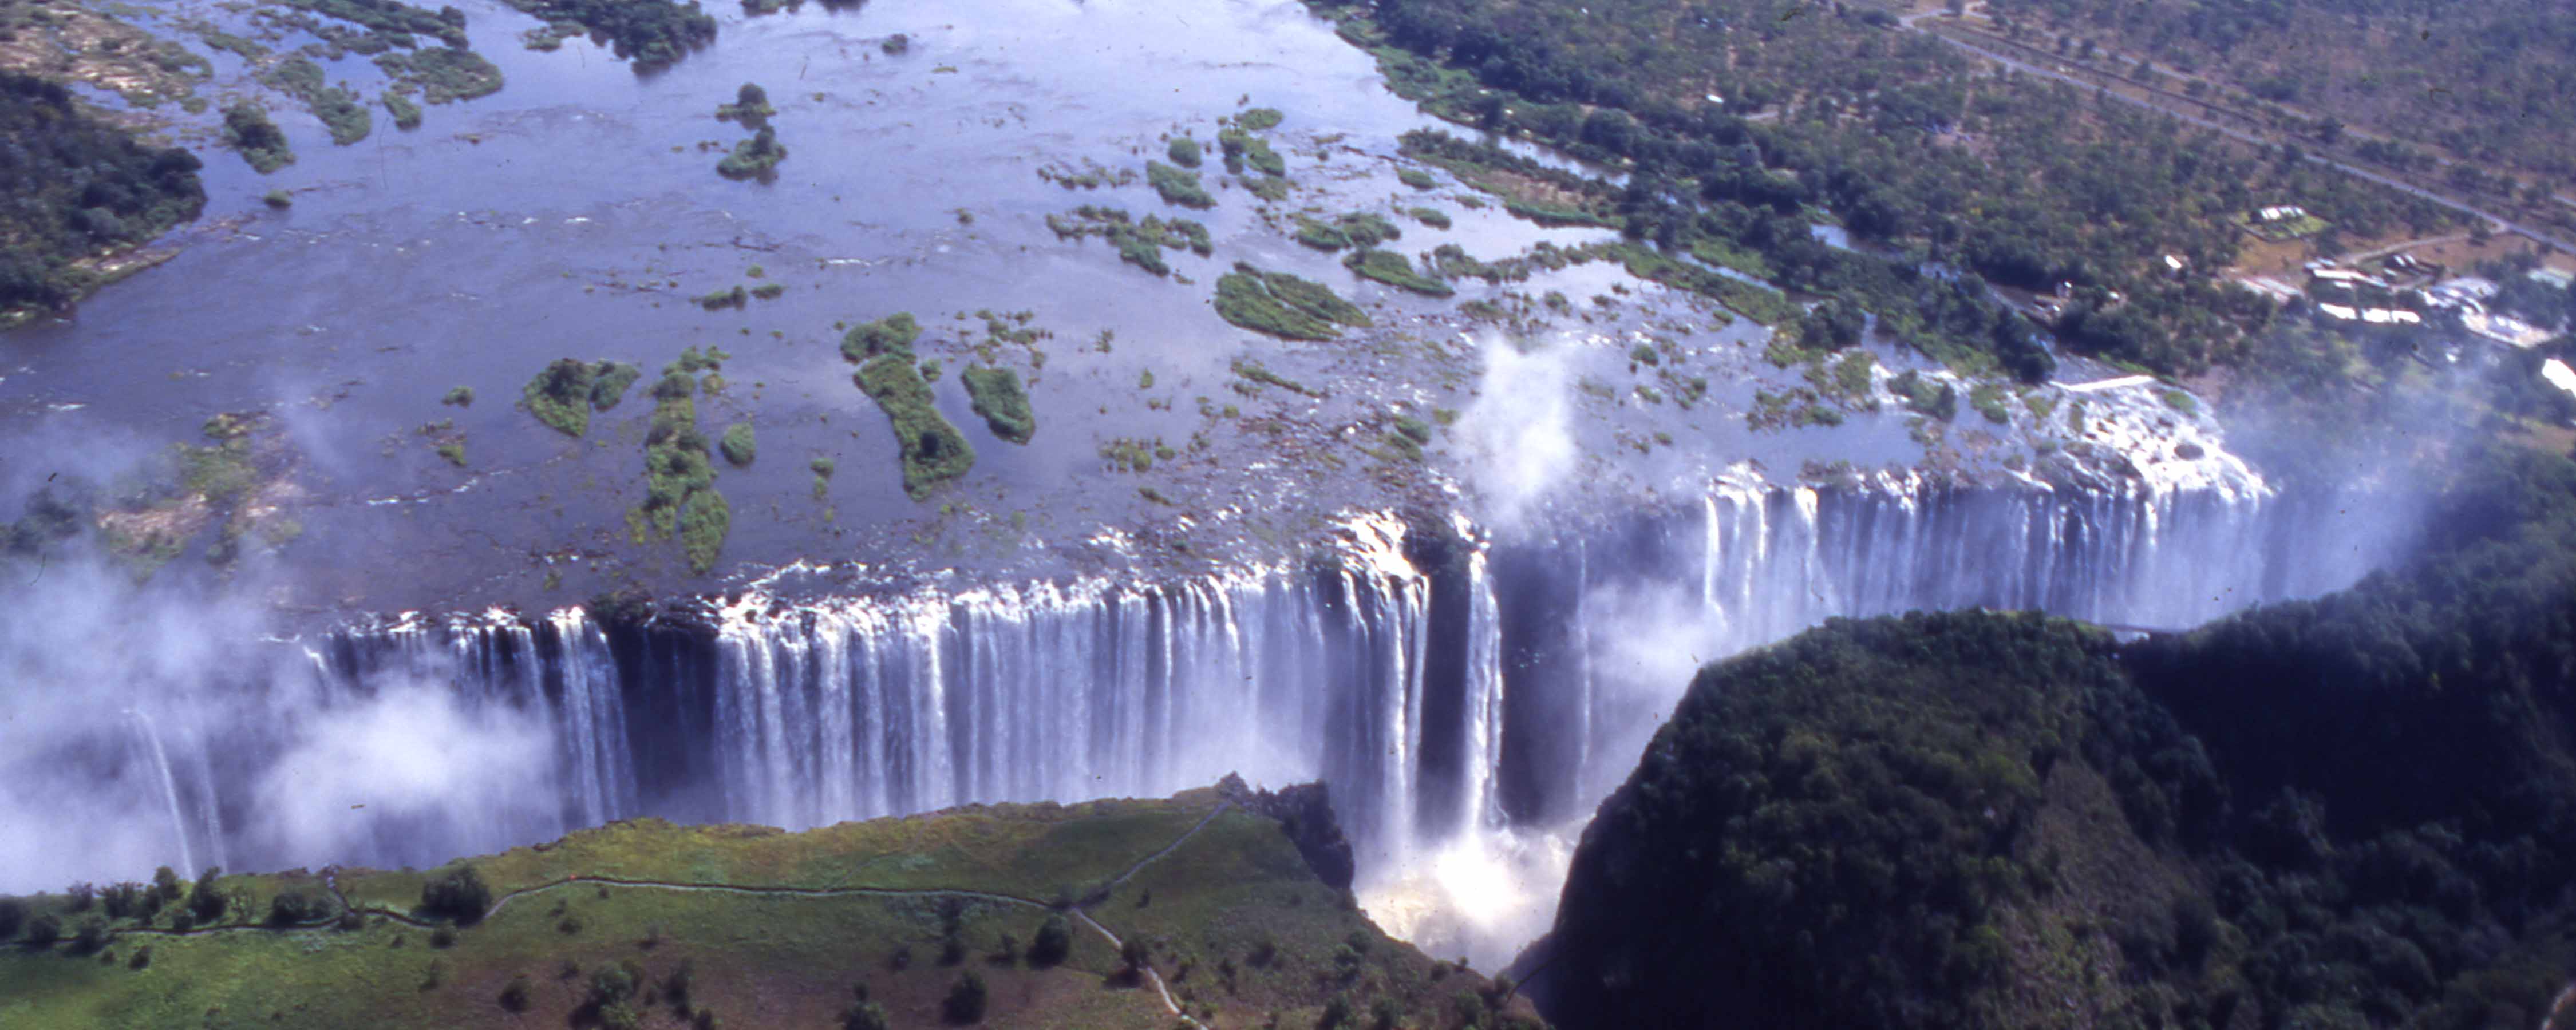 Victoria Falls benefiting tourist source countries